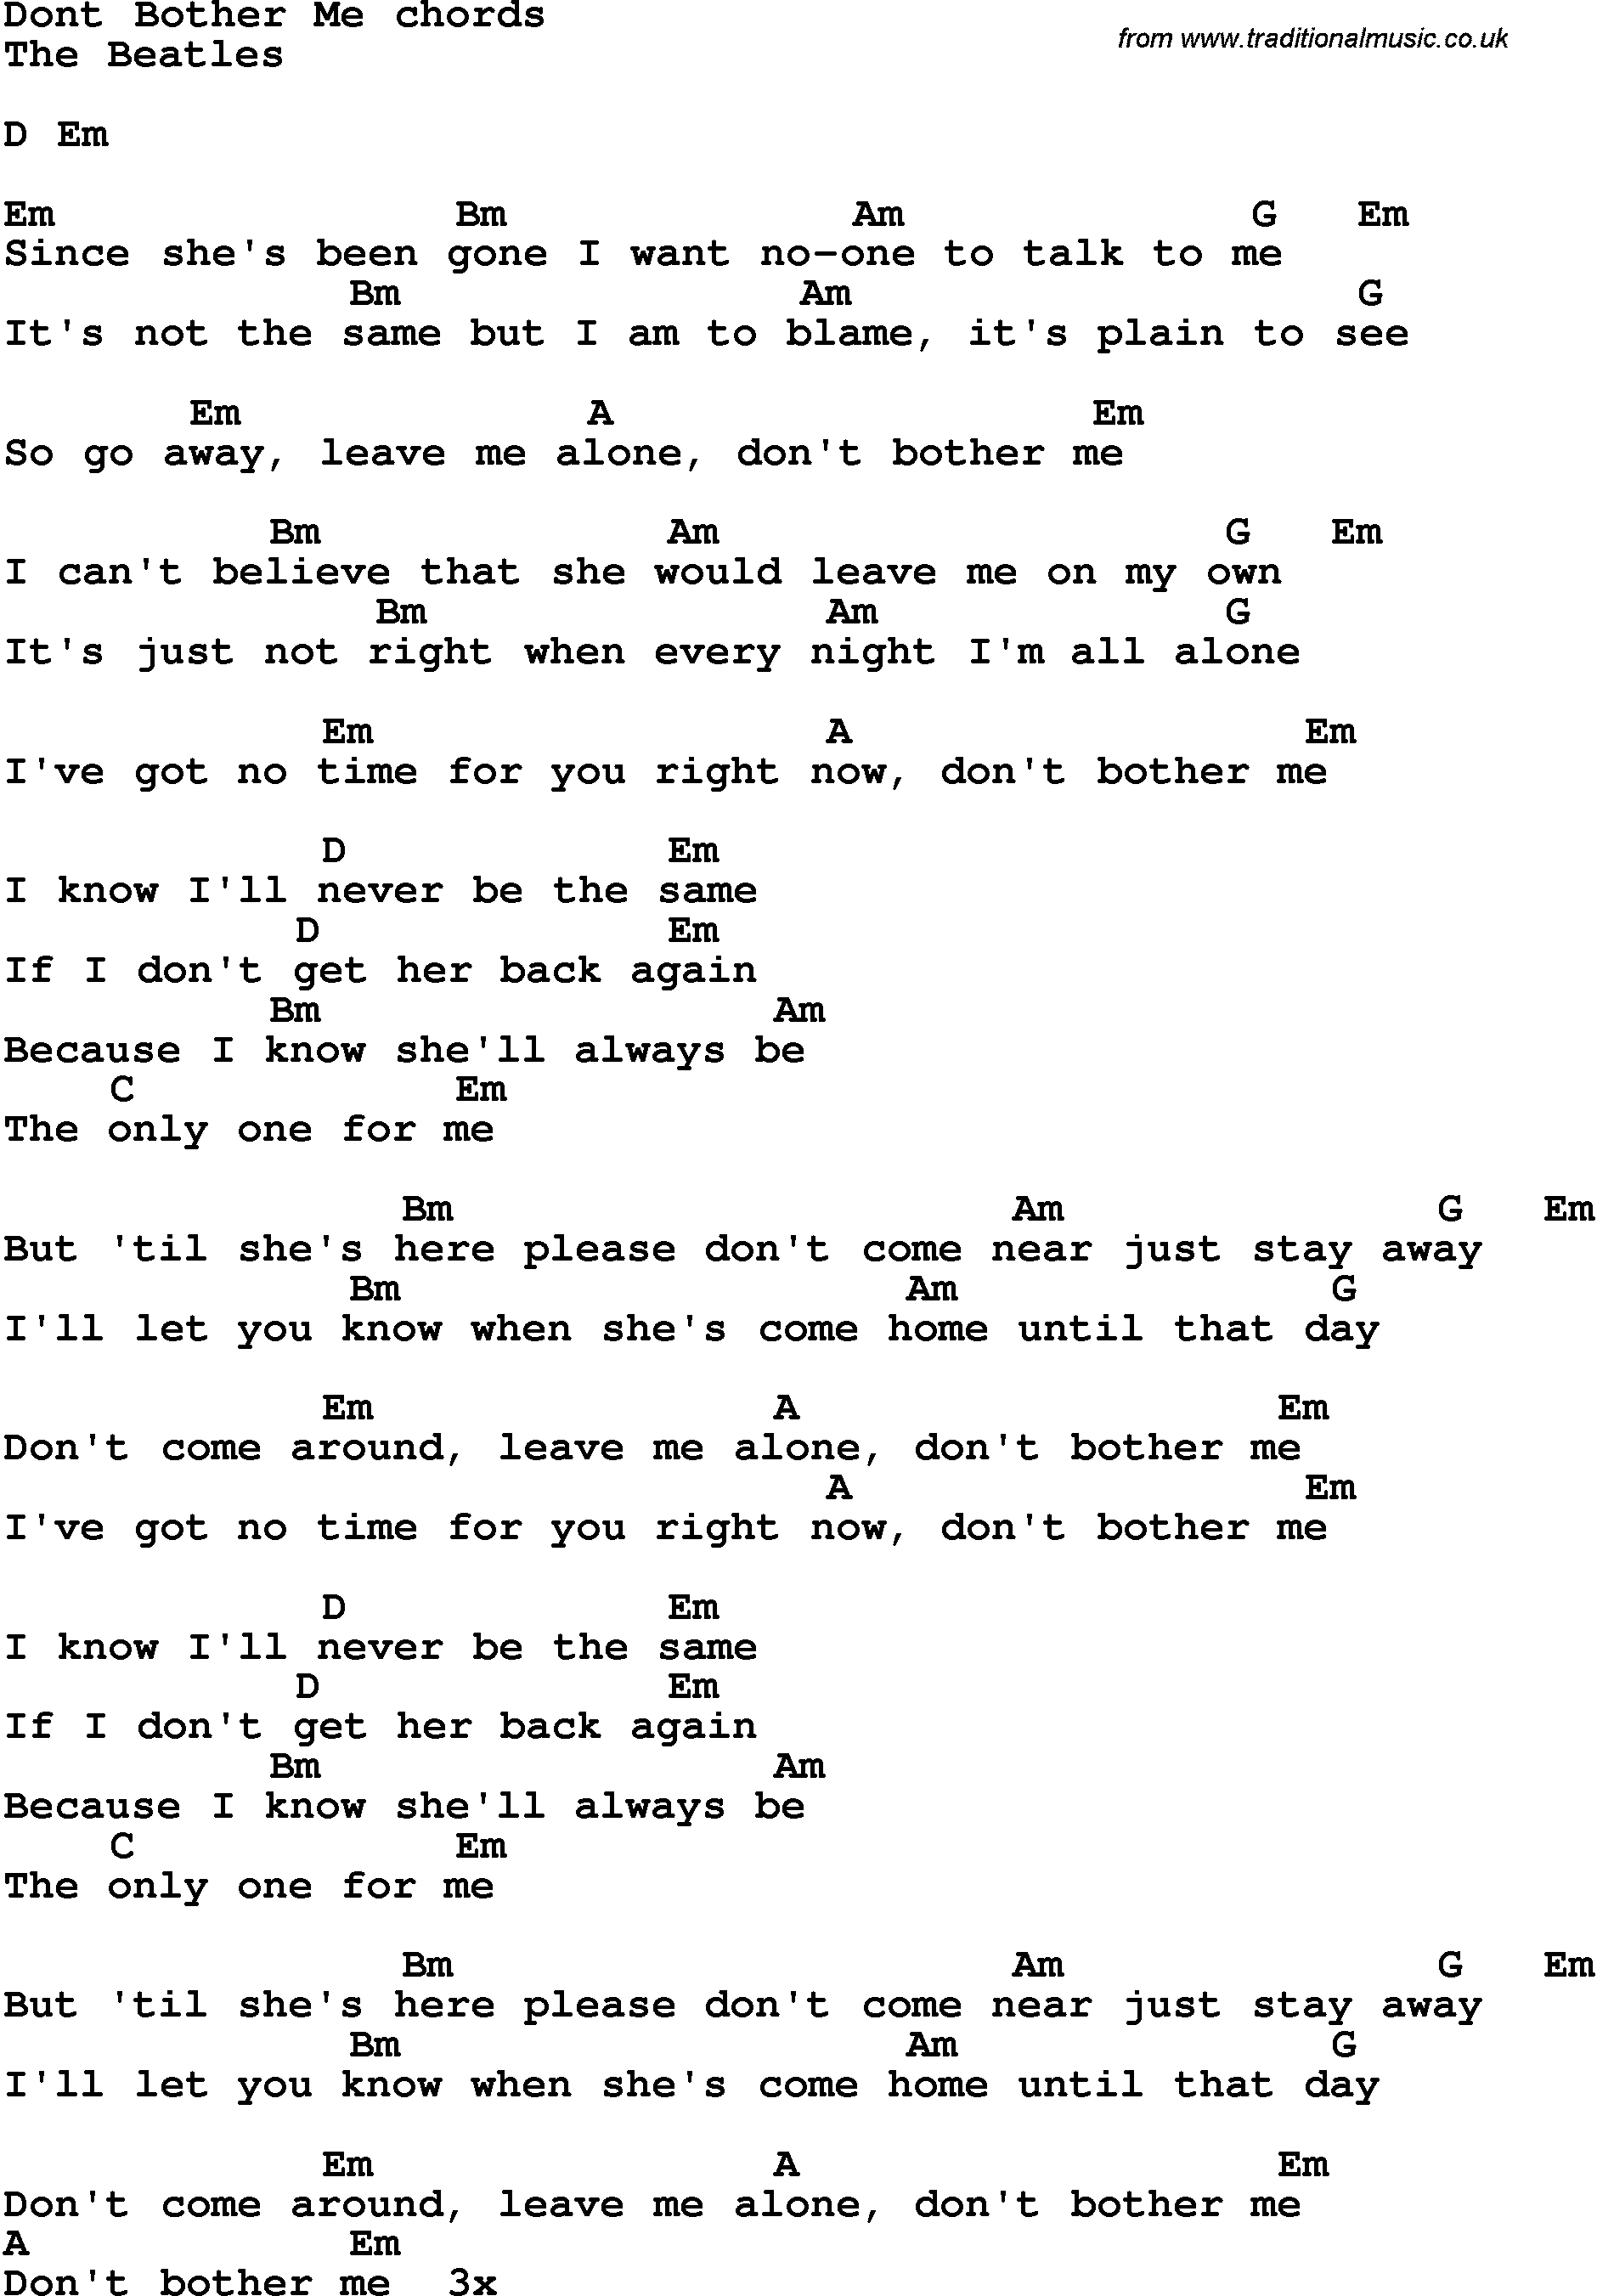 Song Lyrics with guitar chords for Don't Bother Me - The Beatles